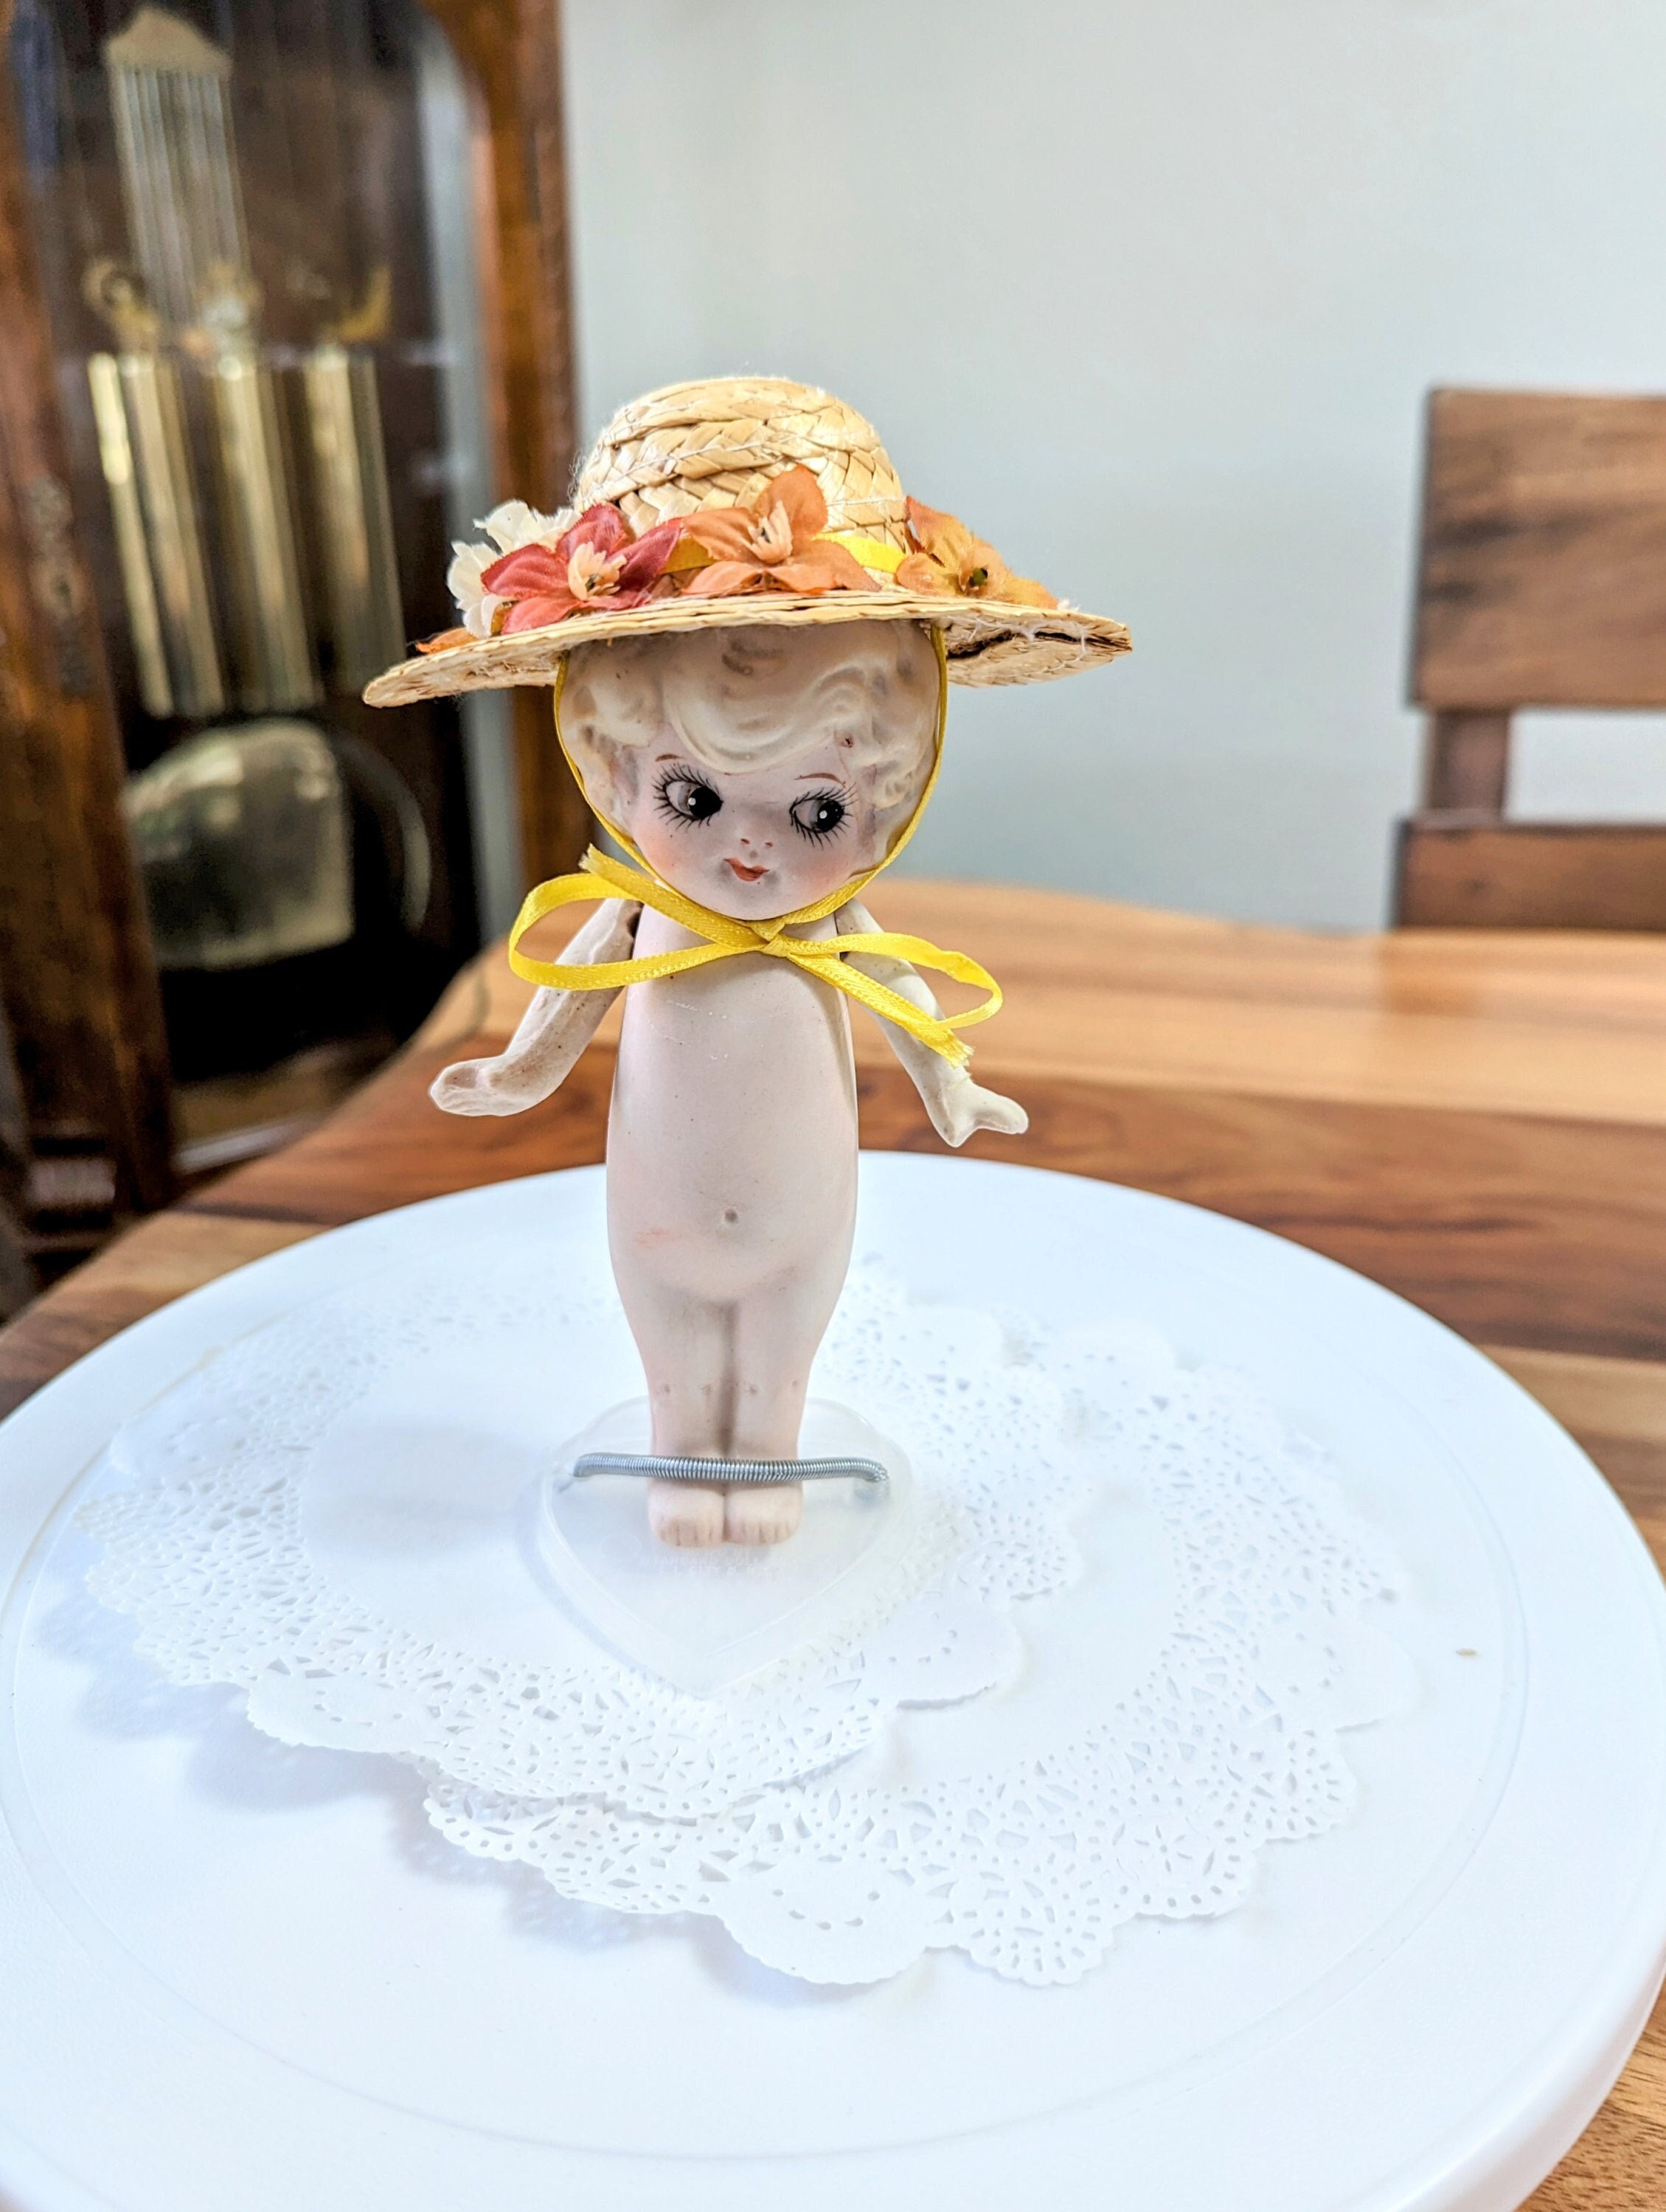 Old Bisque doll Betty Boop, Kewpie, Flapper antique doll, big eye doll,  Dollhouse size, All bisque, made in Japan, Christmas gift for mom